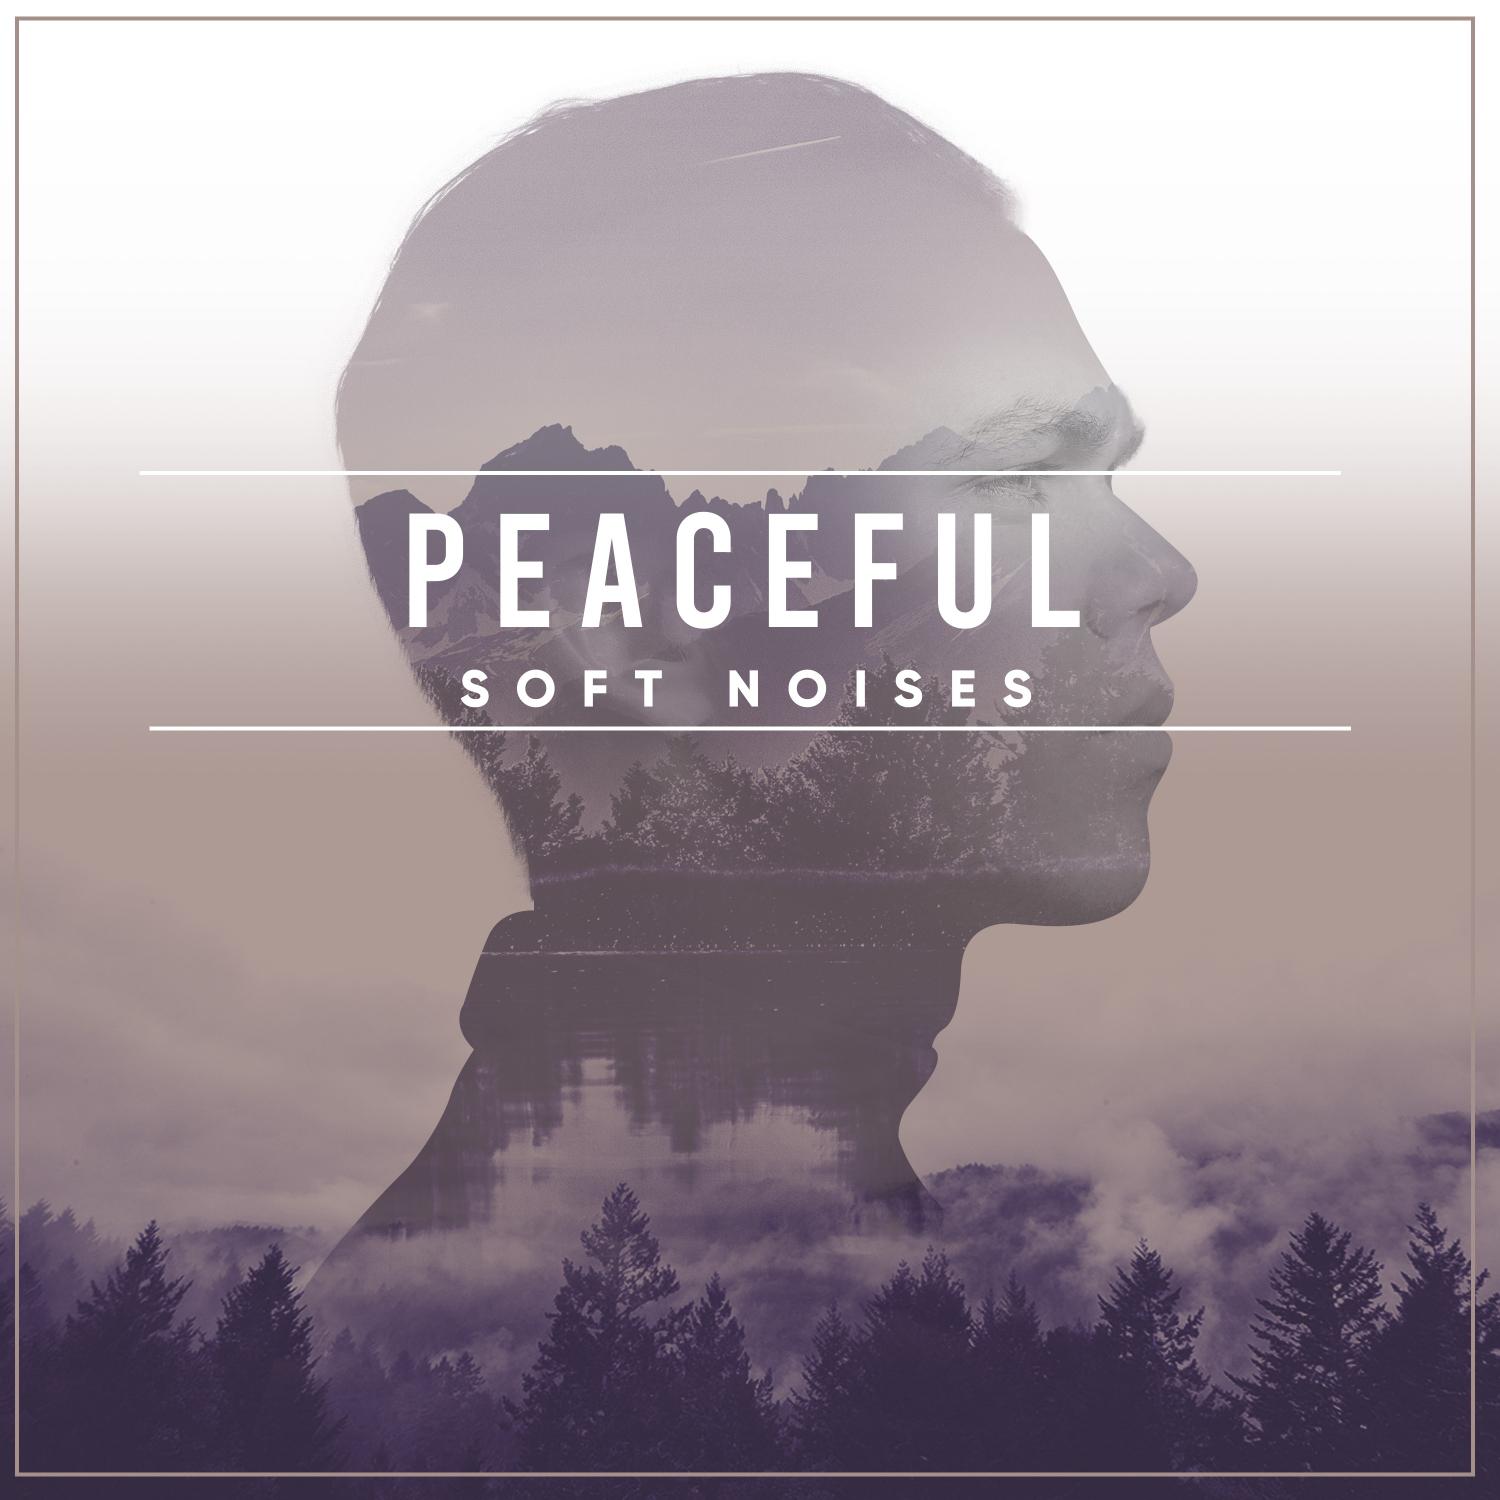 20 Peaceful Soft Noises to Provide Focus